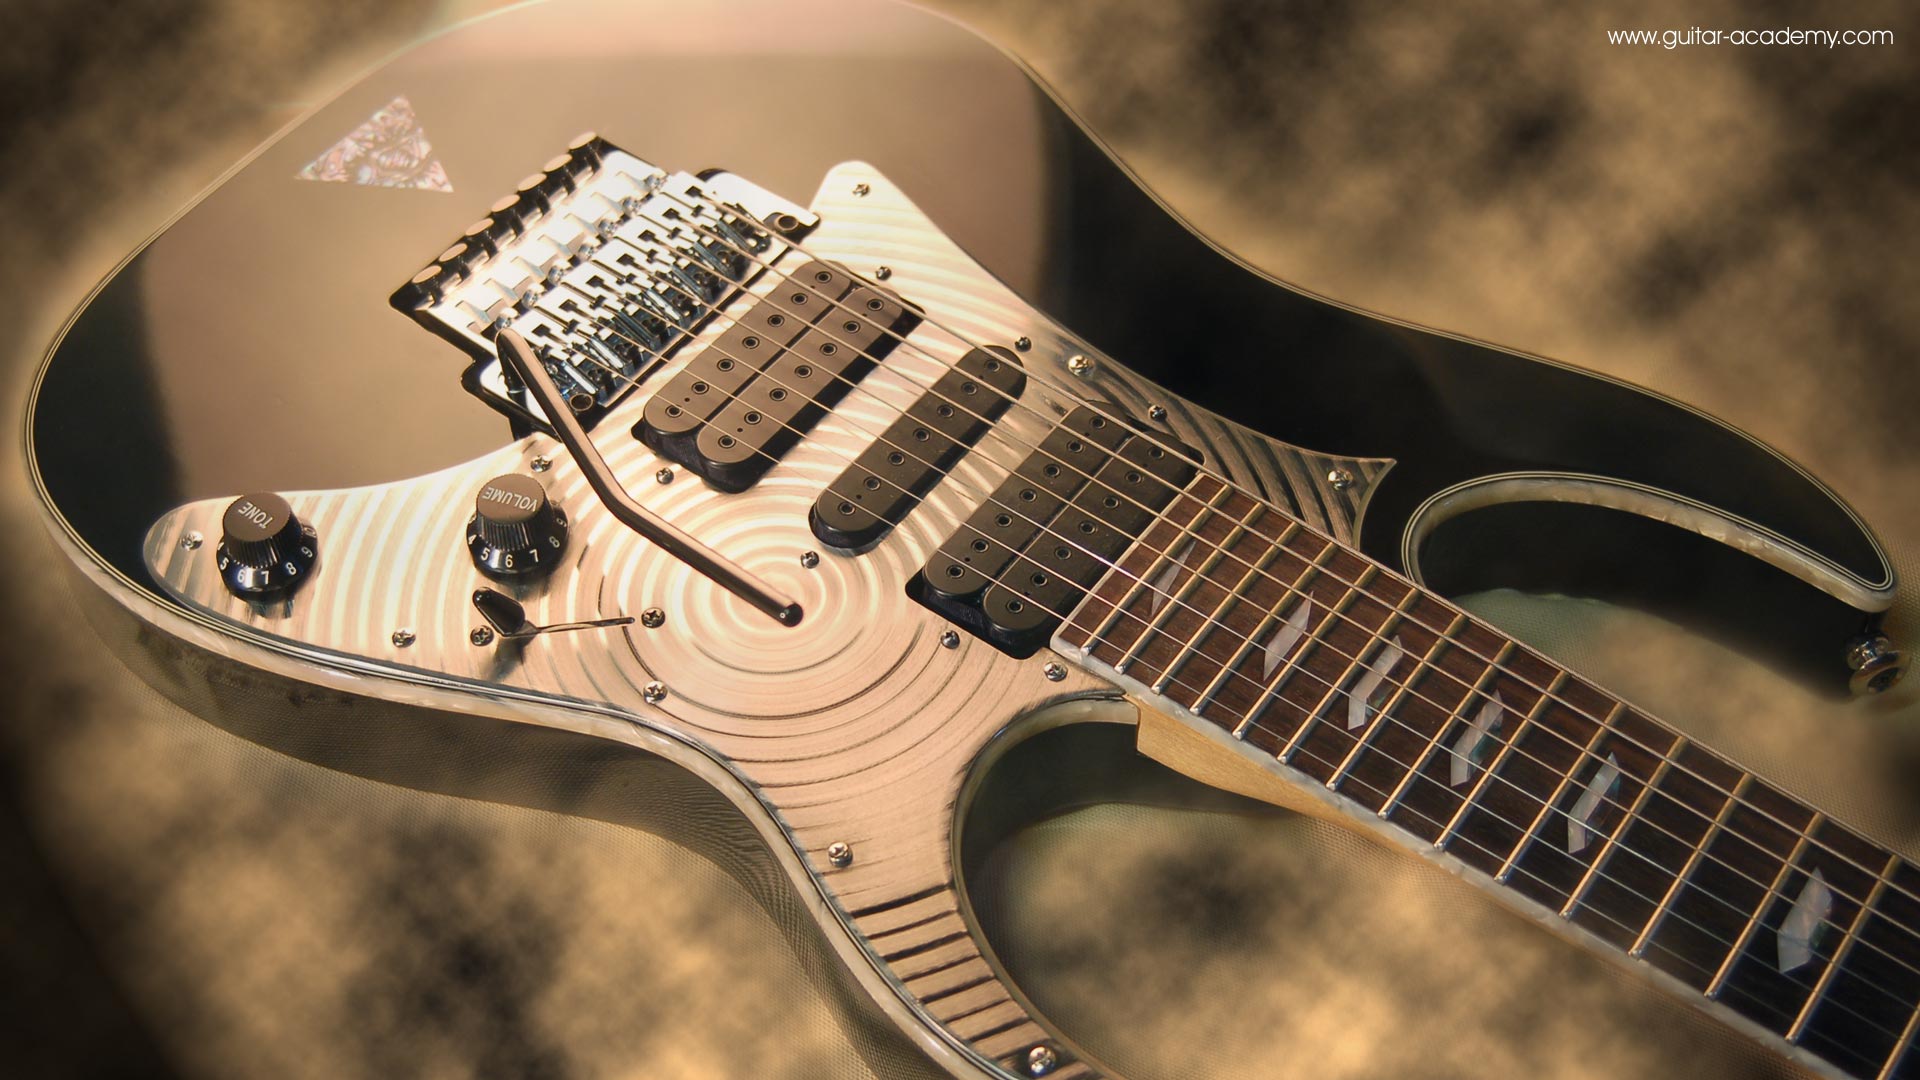 Ibanez Guitar Wallpapers For Desktop Music by Free download best